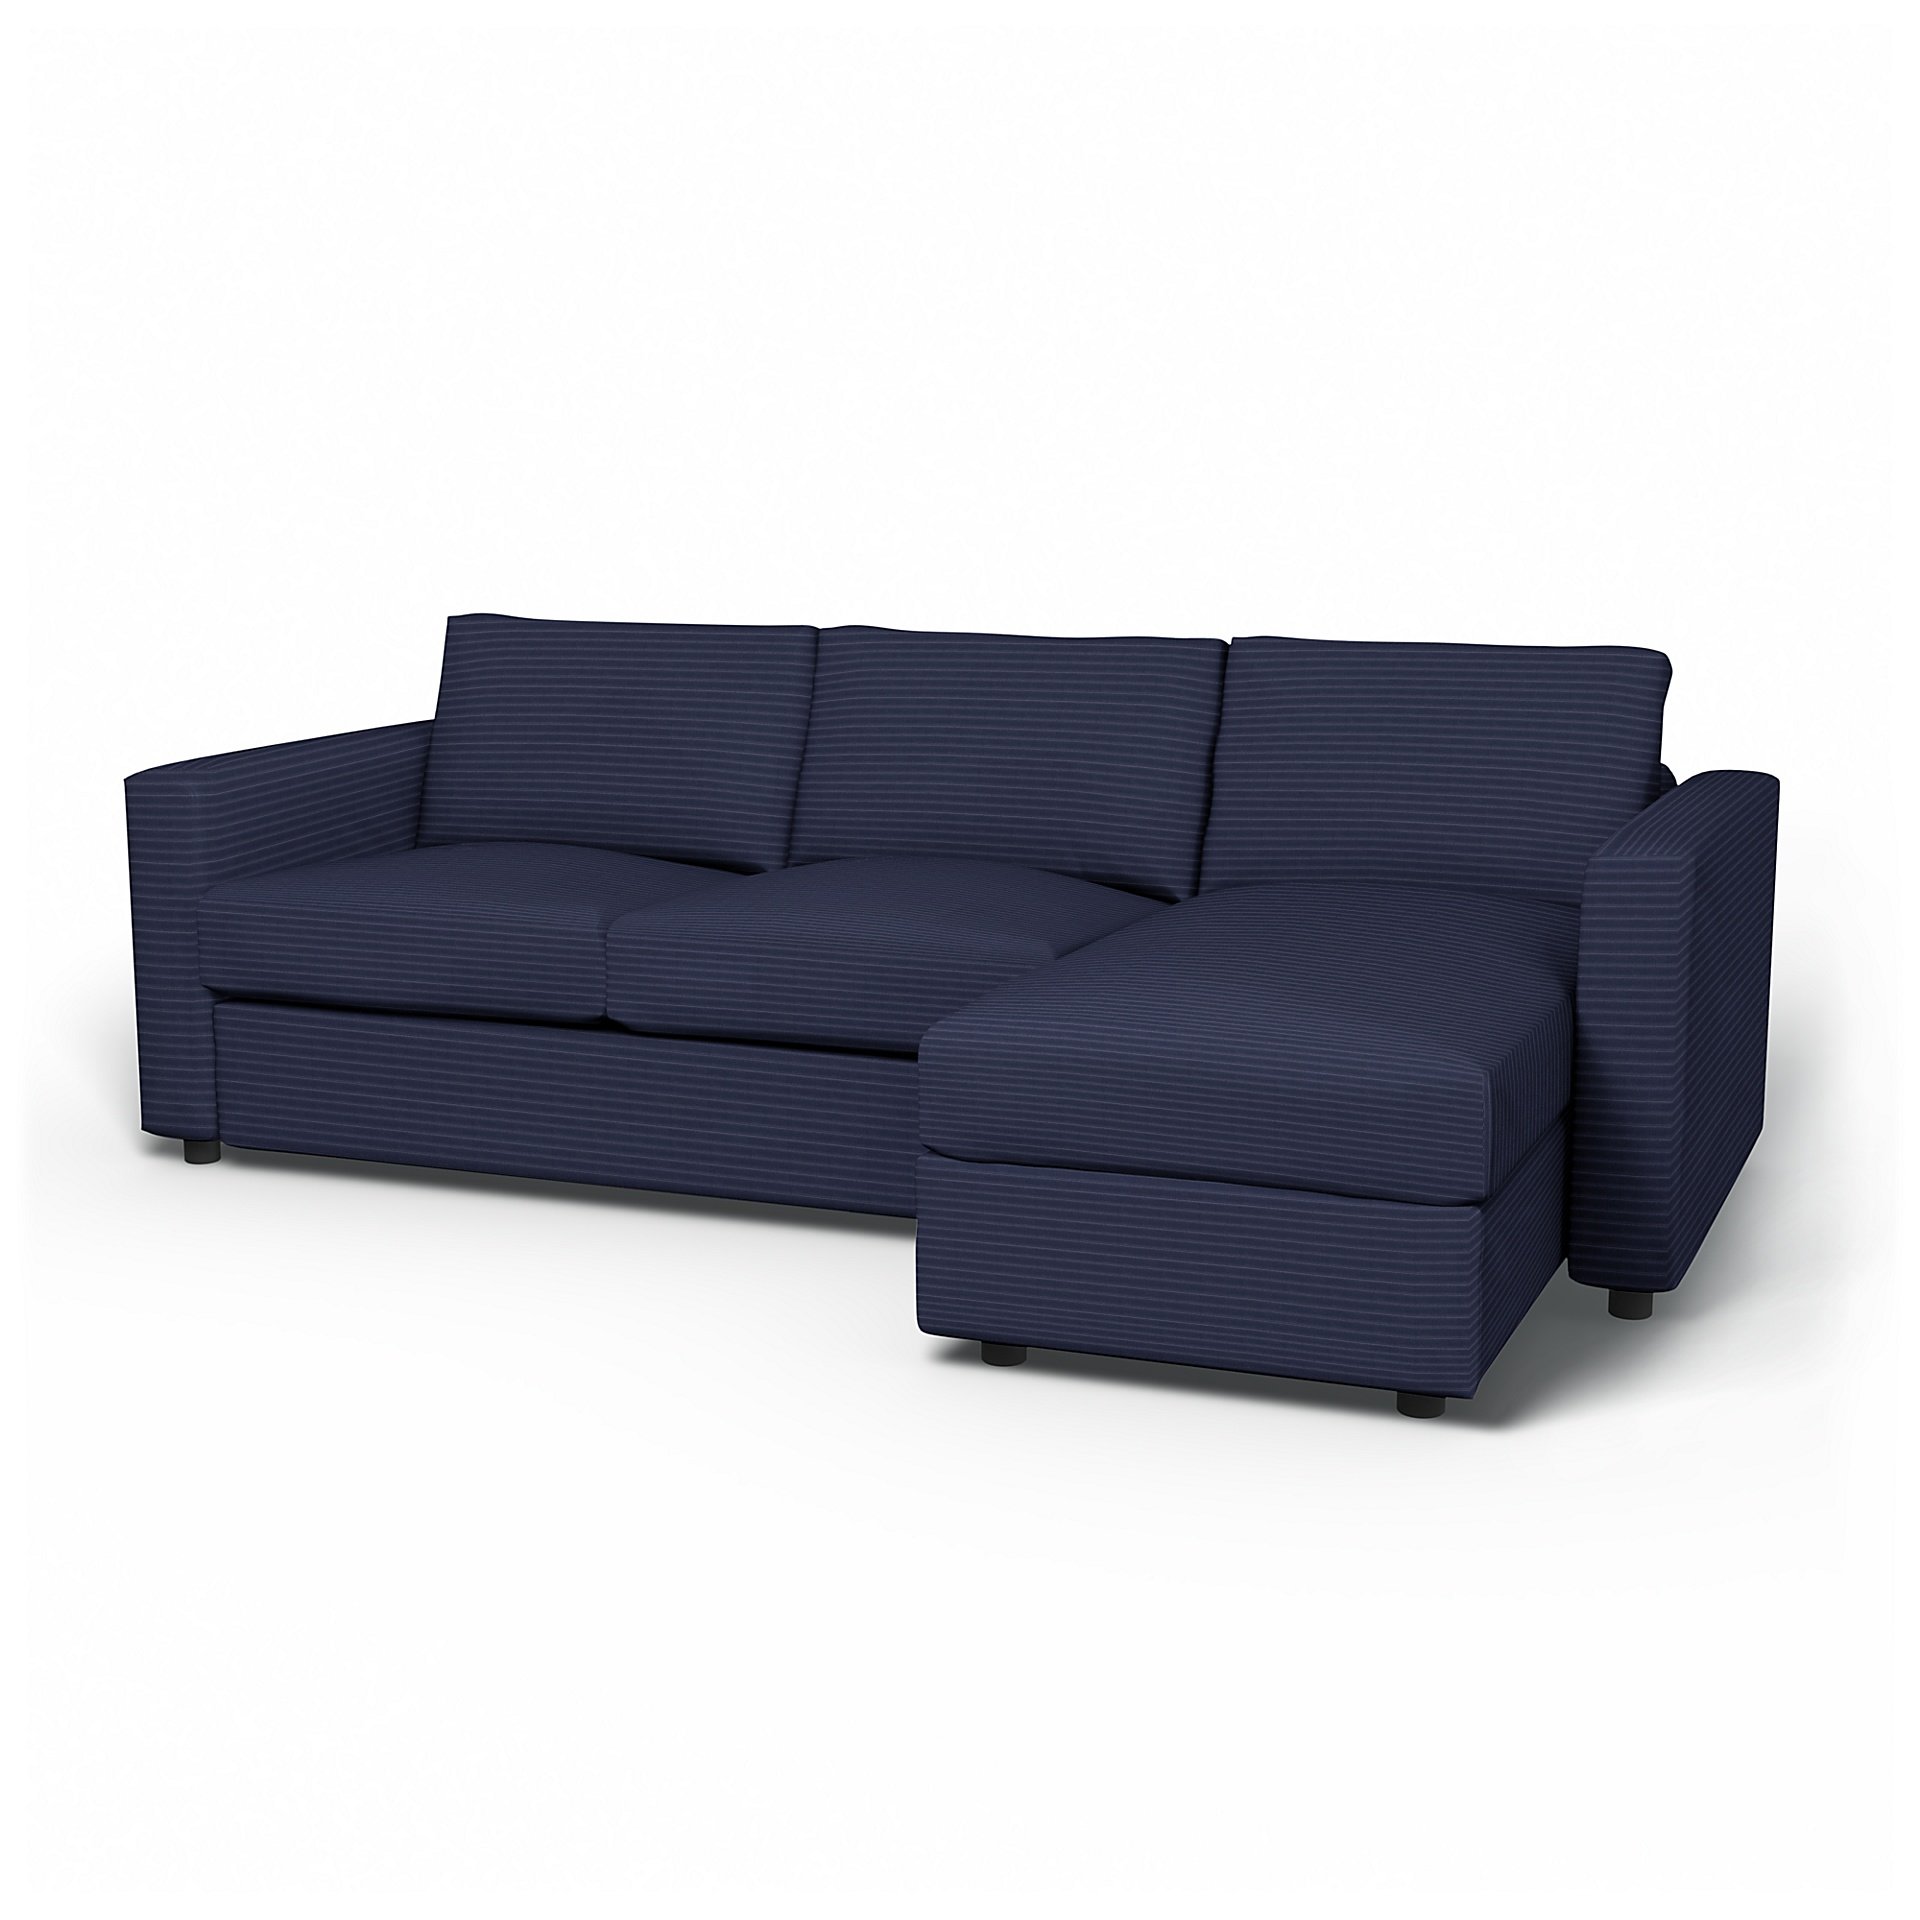 IKEA - Vimle 2 Seater Sofa with Chaise Cover, Volcanic Ash, Corduroy - Bemz